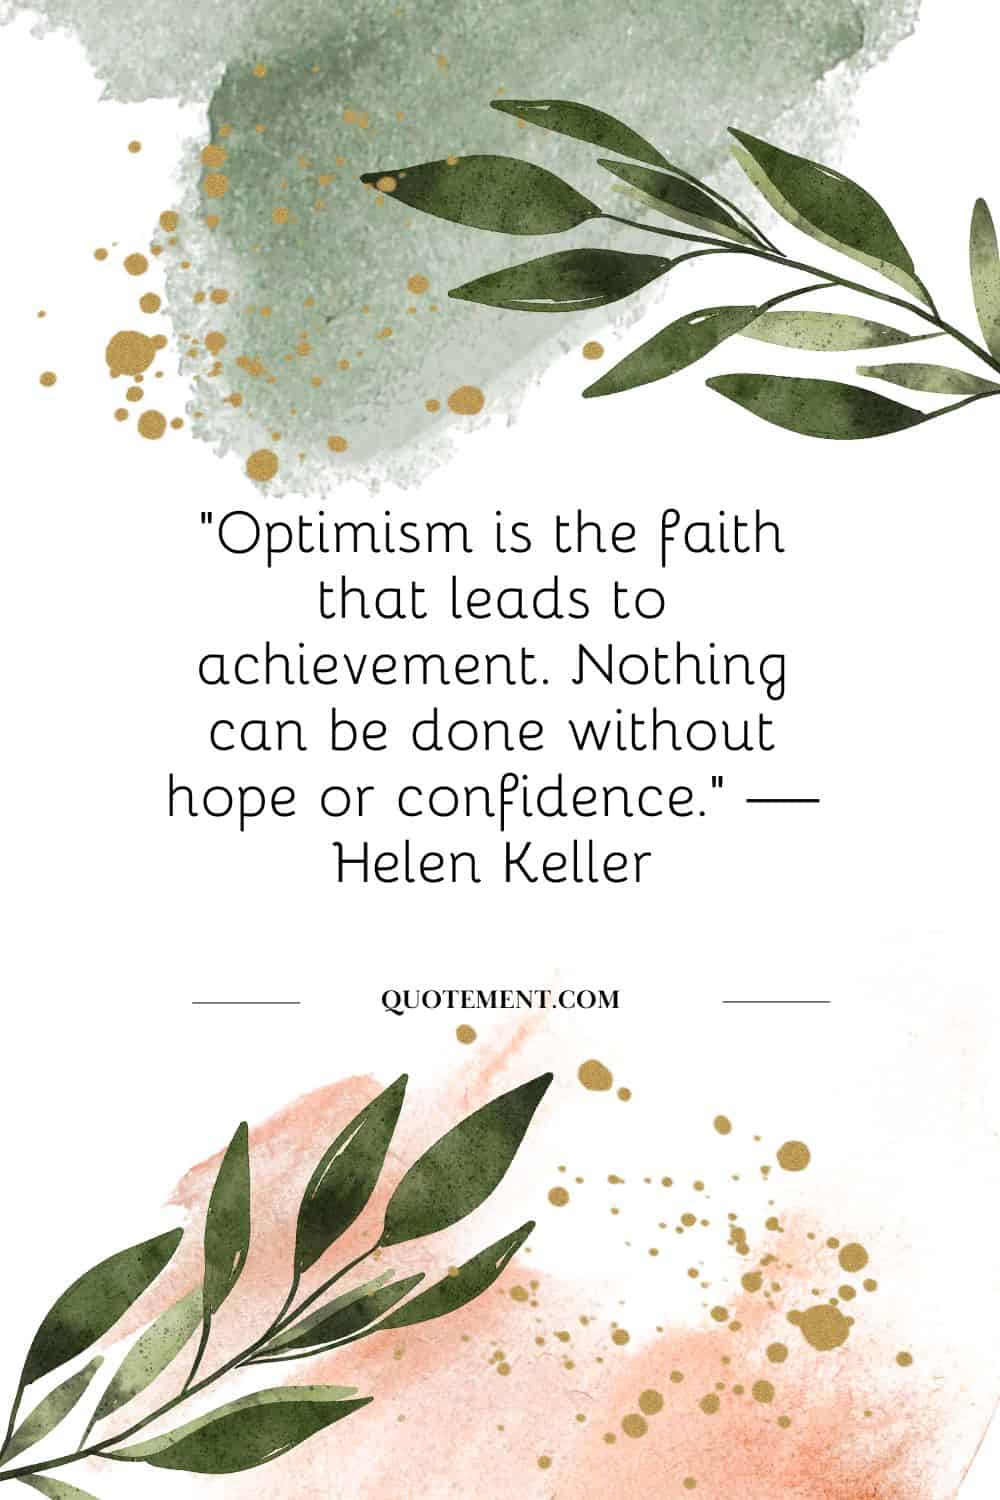 “Optimism is the faith that leads to achievement. Nothing can be done without hope or confidence.” — Helen Keller